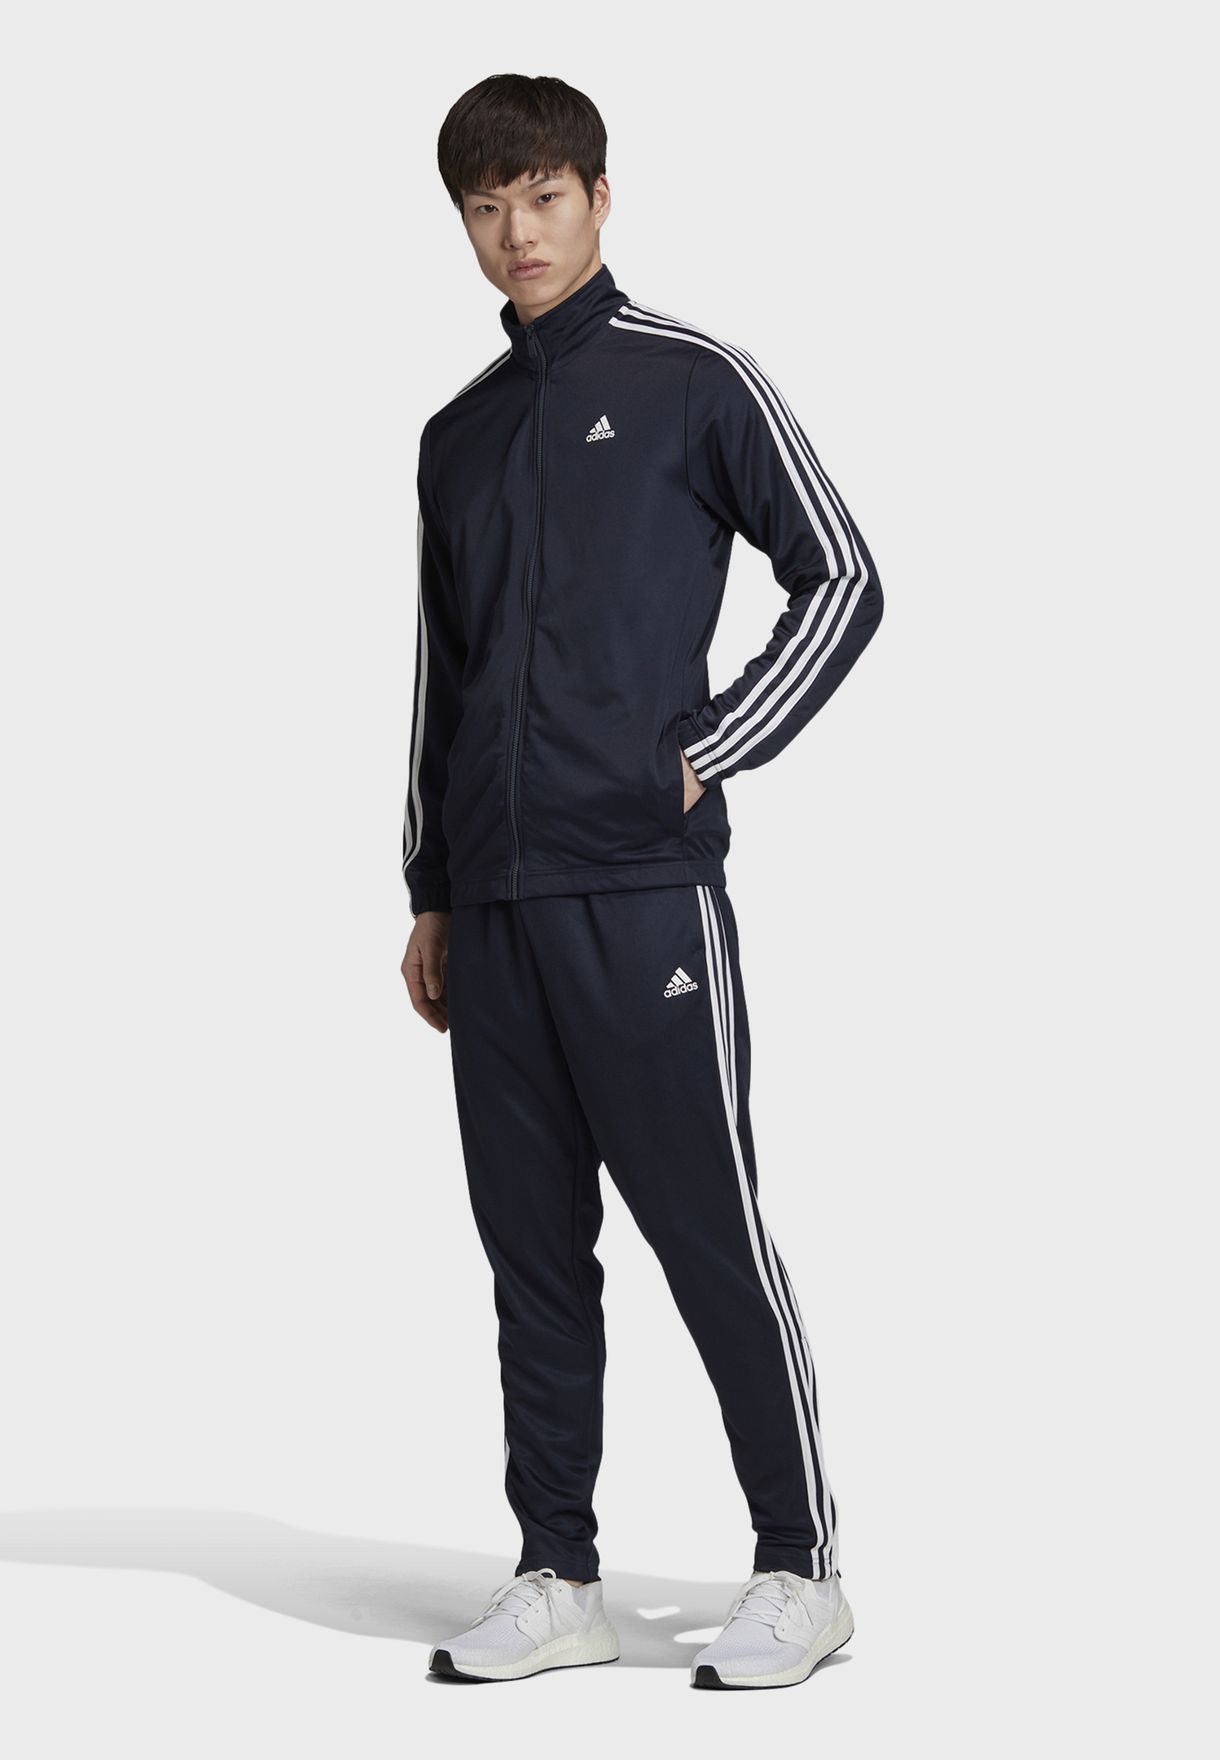 what is the price of adidas tracksuit